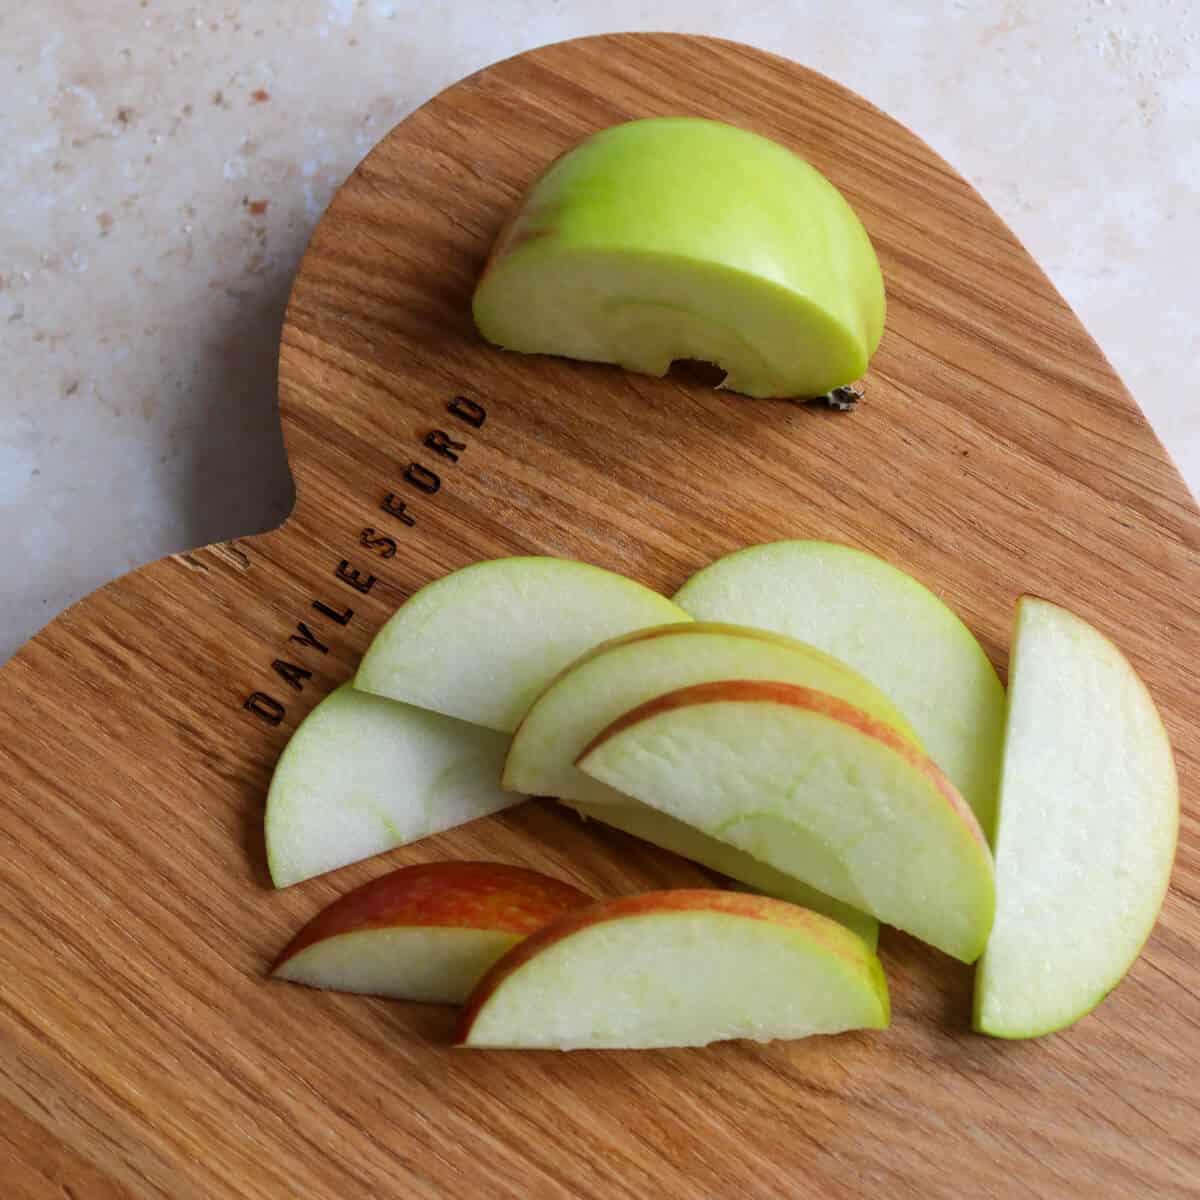 Apples cut into thin slices. 